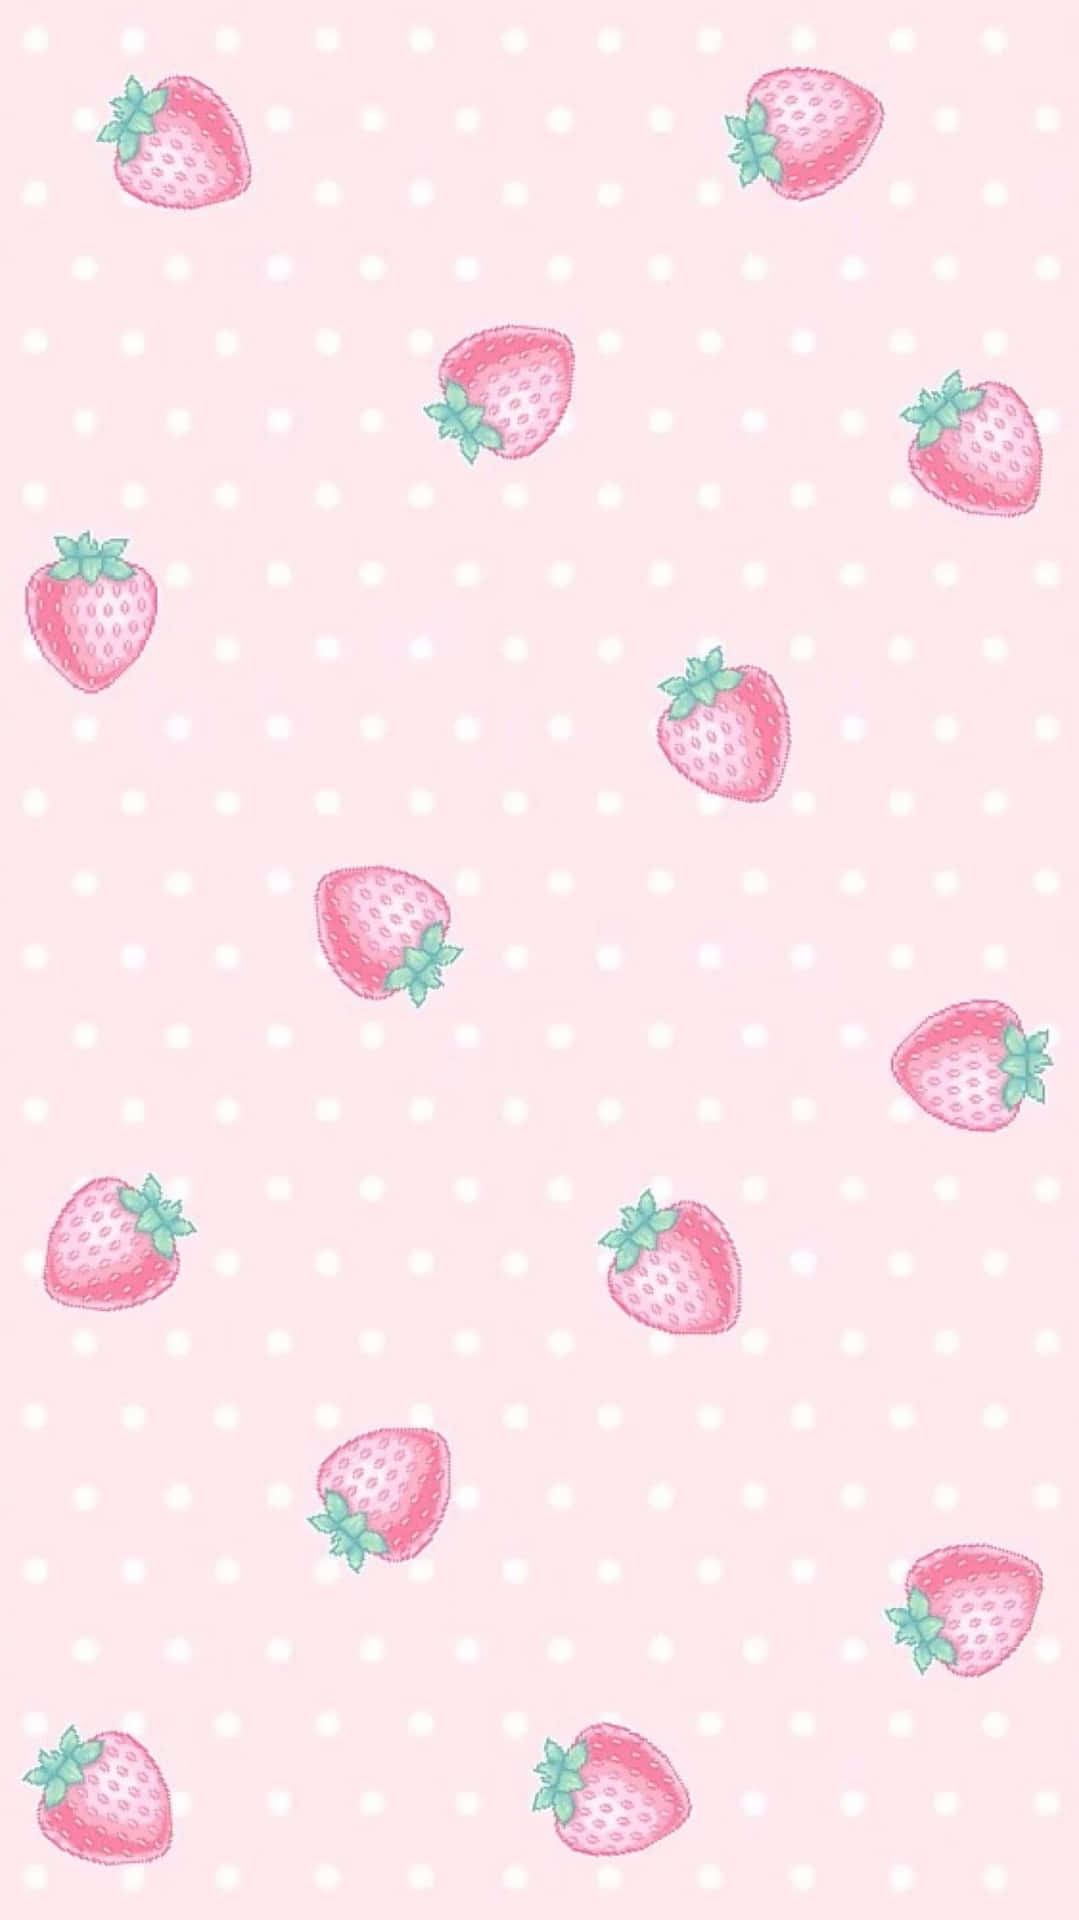 Strawberry Background Images HD Pictures and Wallpaper For Free Download   Pngtree